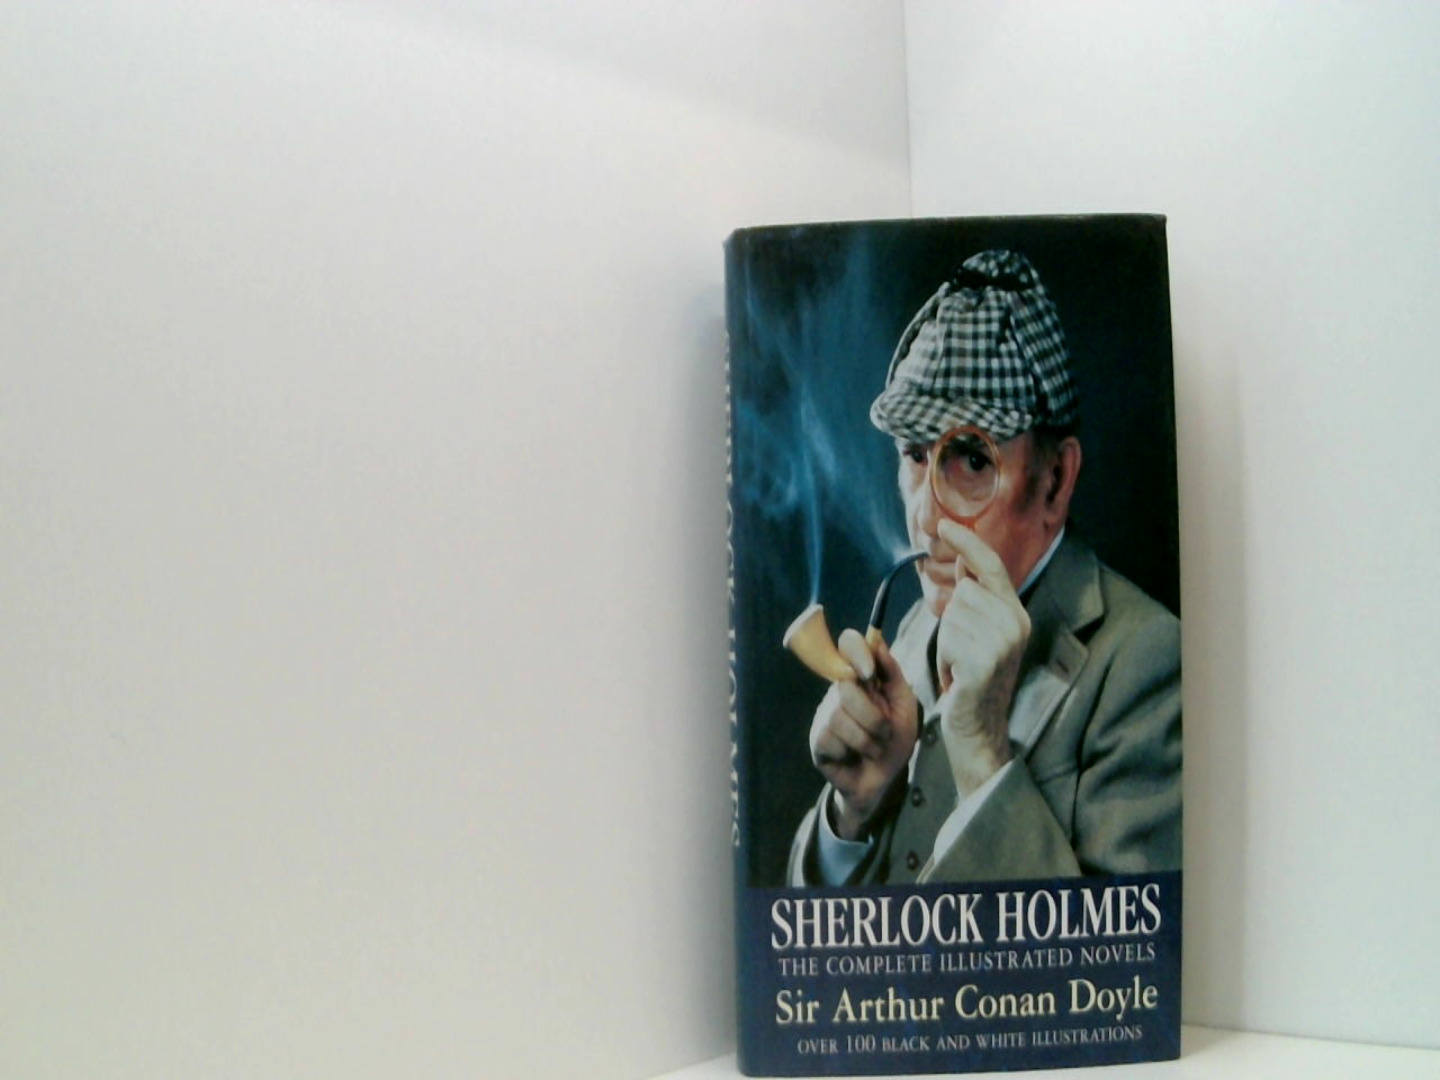 Sherlock Holmes: The Complete Illustrated Novels: The Completed Illustrated Novels - Doyle Arthur Conan, Sir